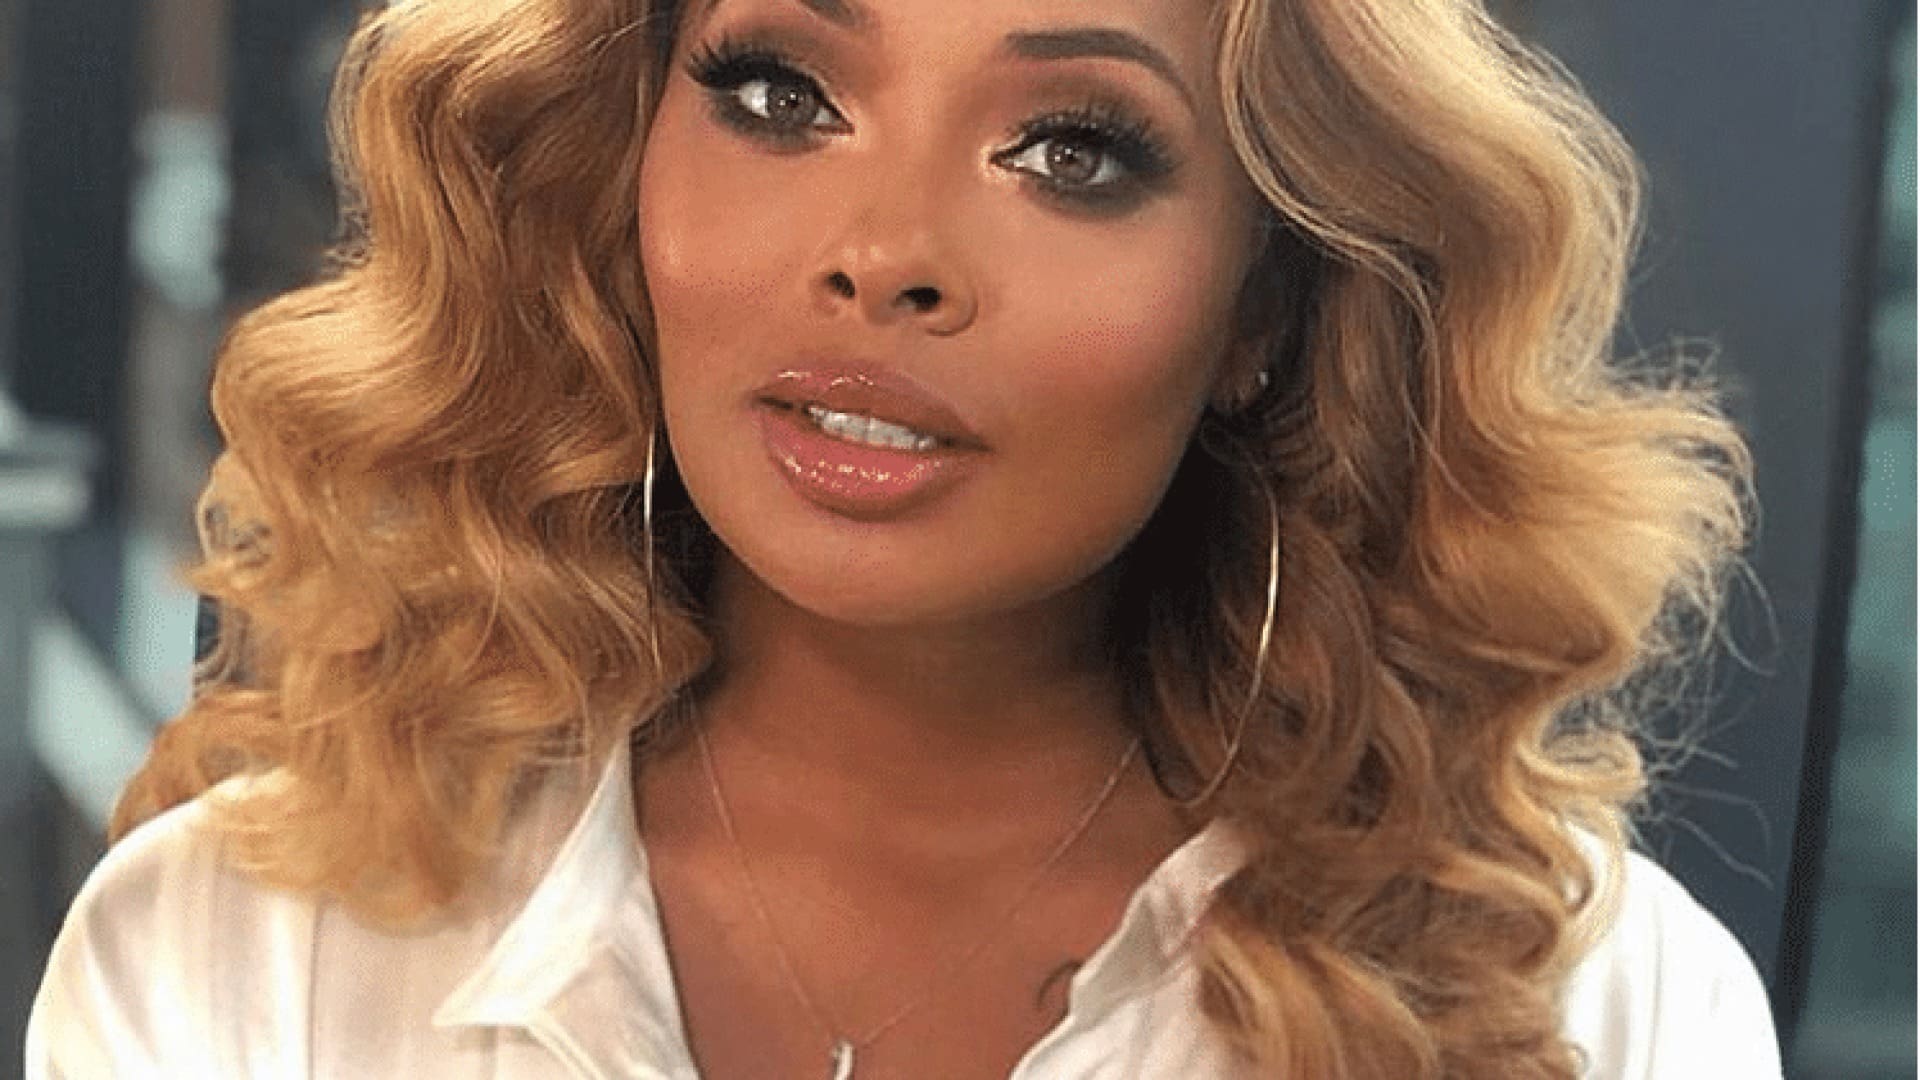 Eva Marcille Continues To Ask For Justice For Breonna Taylor